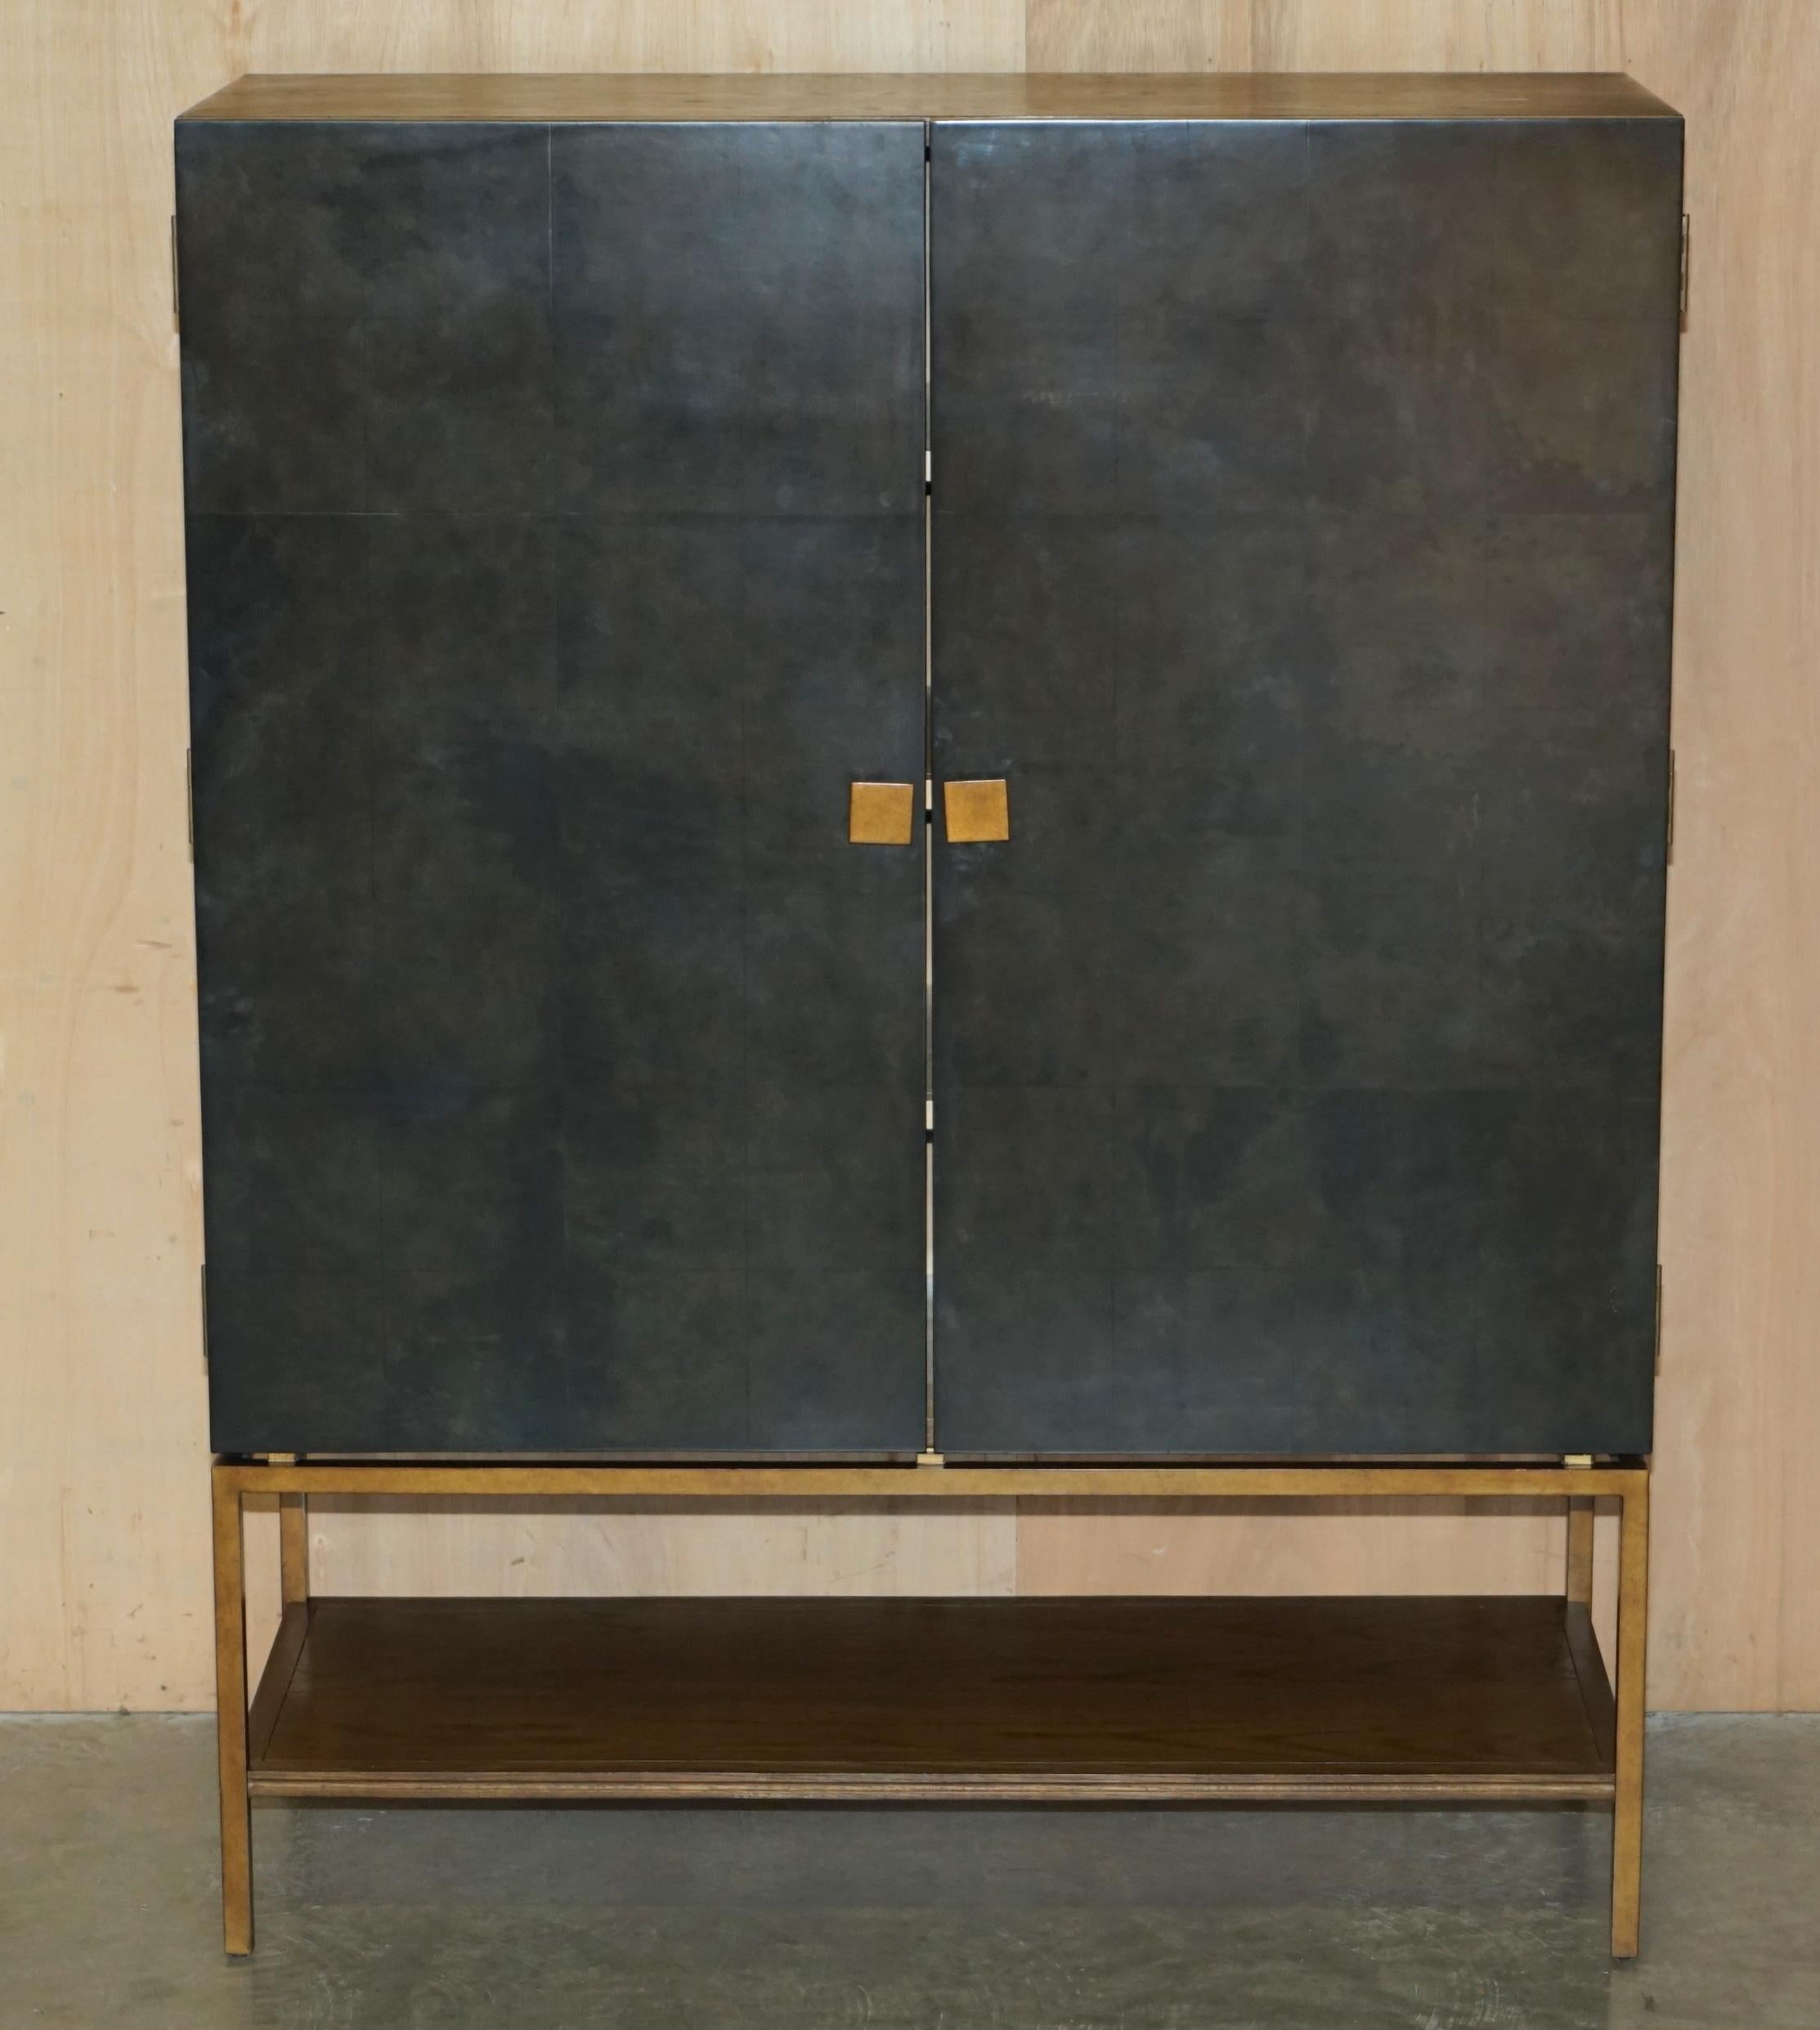 Royal House Antiques

Royal House Antiques is delighted to offer for this Pollock Black Vellum Cabinet by Julian Chichester RRP £7.055

Please note the delivery fee listed is just a guide, it covers within the M25 only for the UK and local Europe